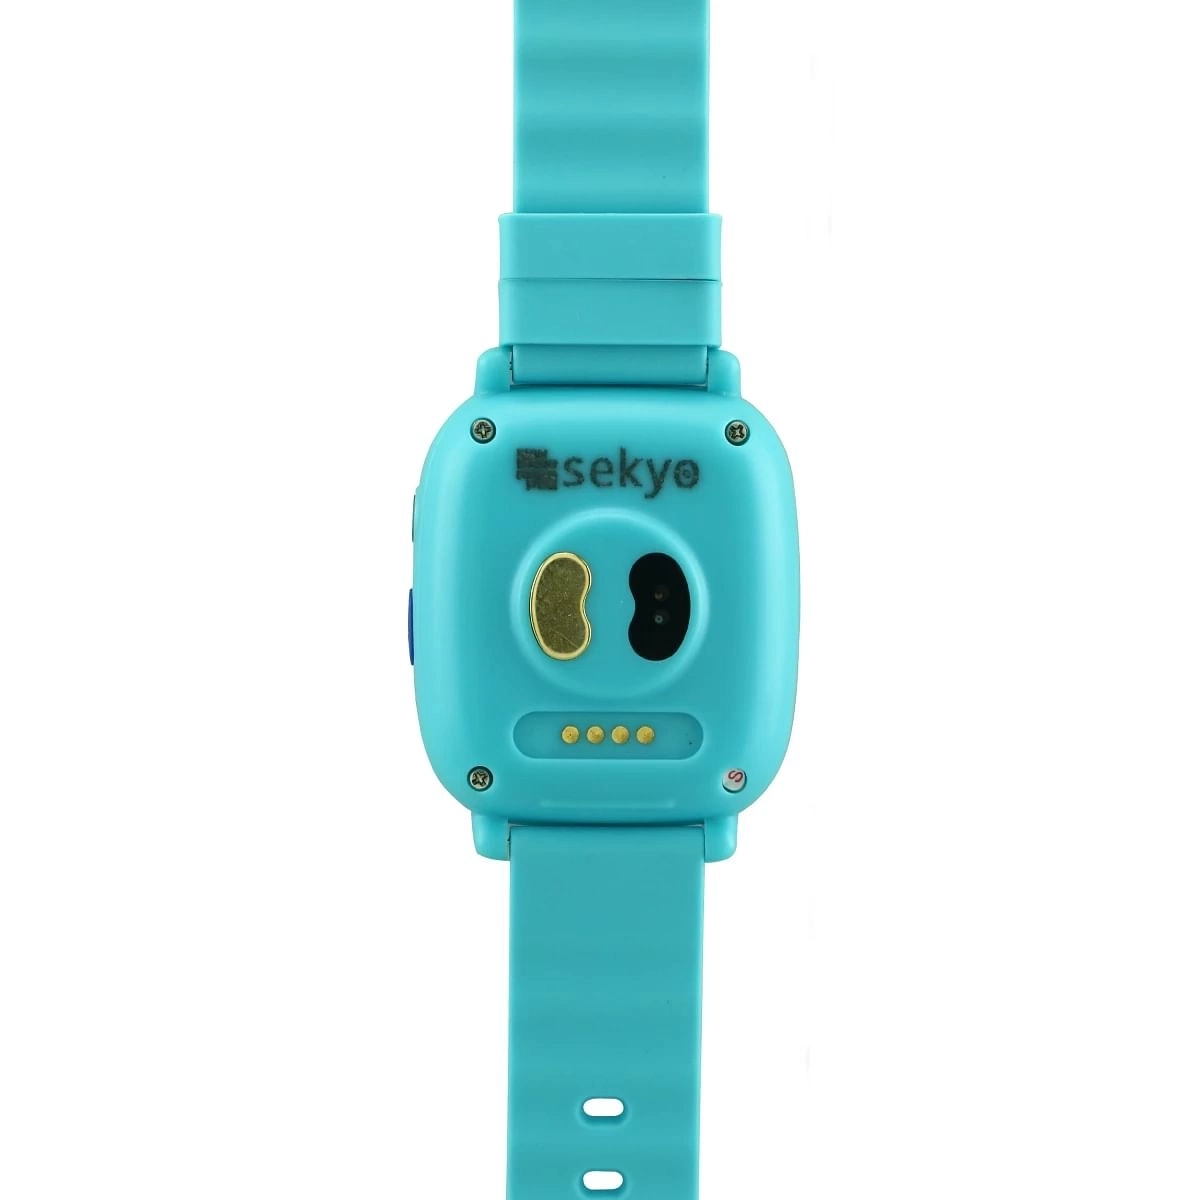 Sekyo Shield Blue location tracking GPS Smart phone Watch for Kids Blue 3Y+